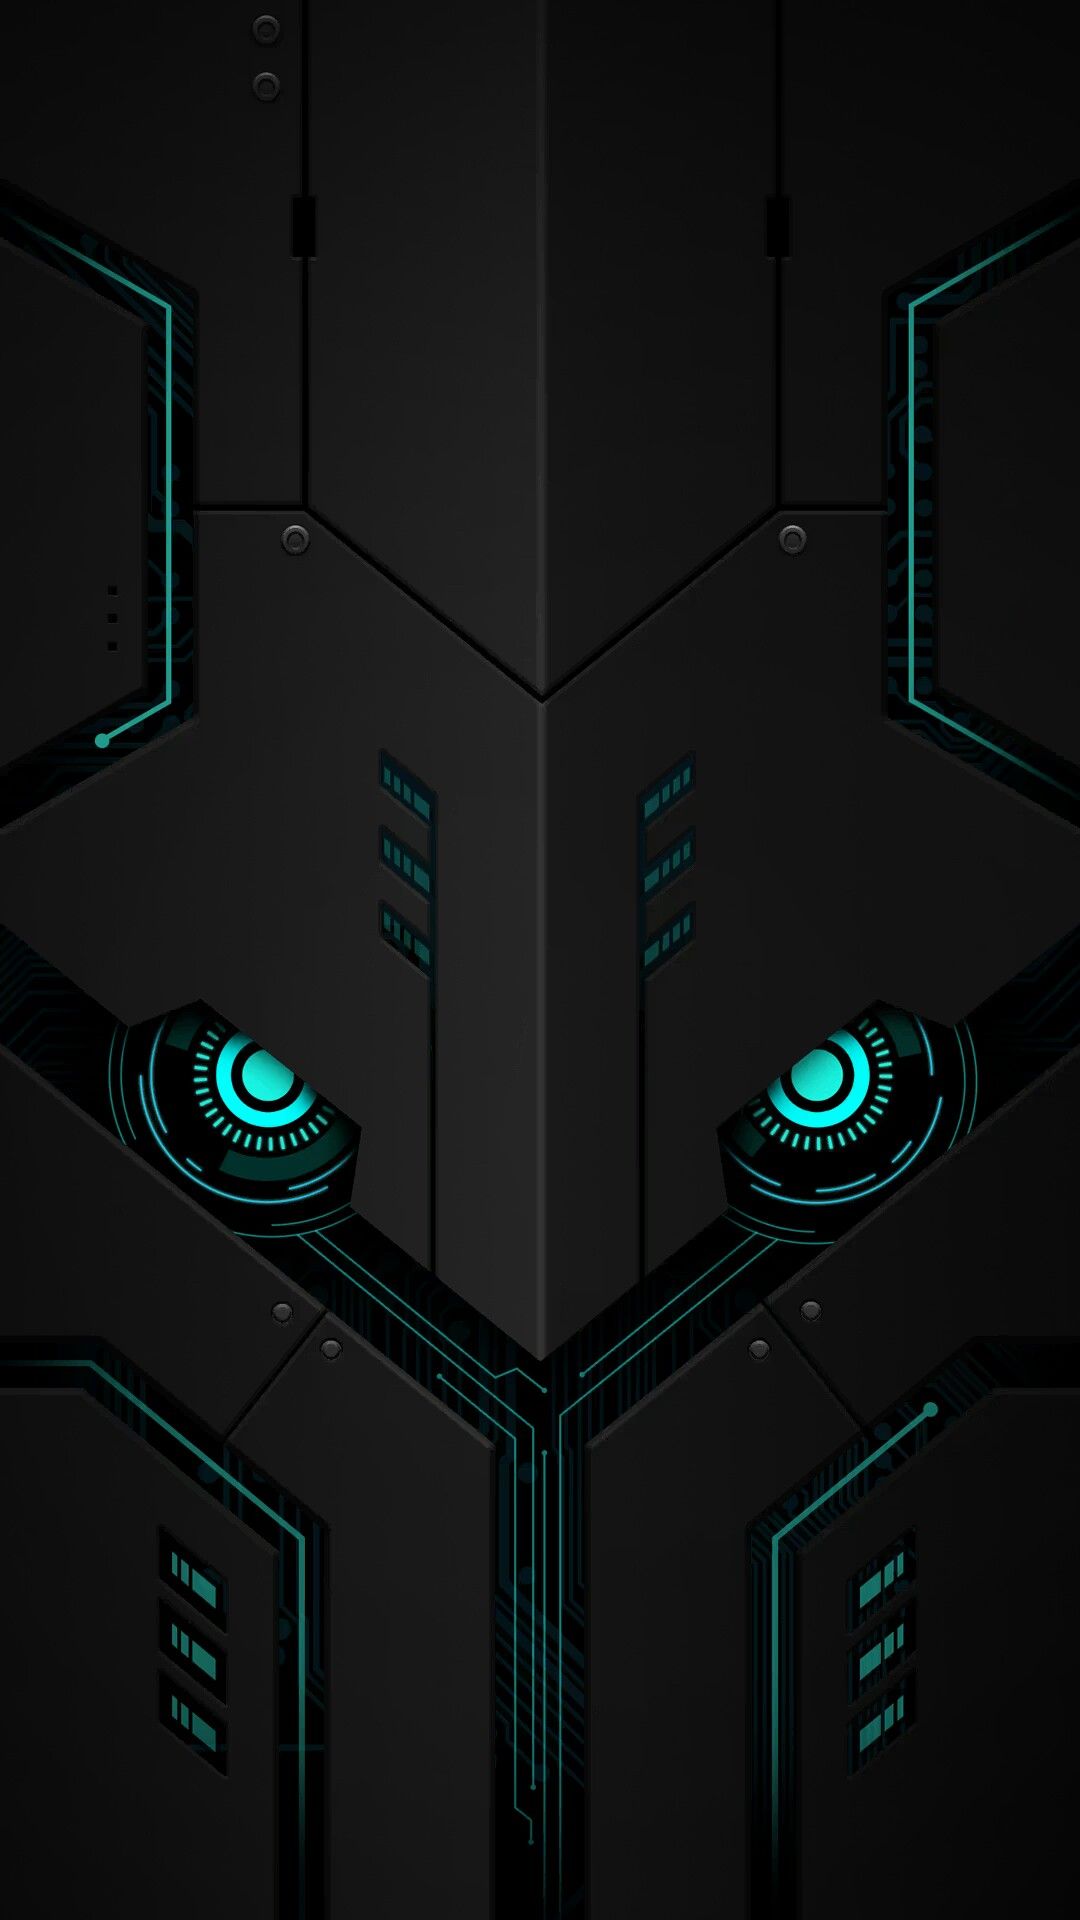 iPhone Wallpaper. Technology, Architecture, Fictional character